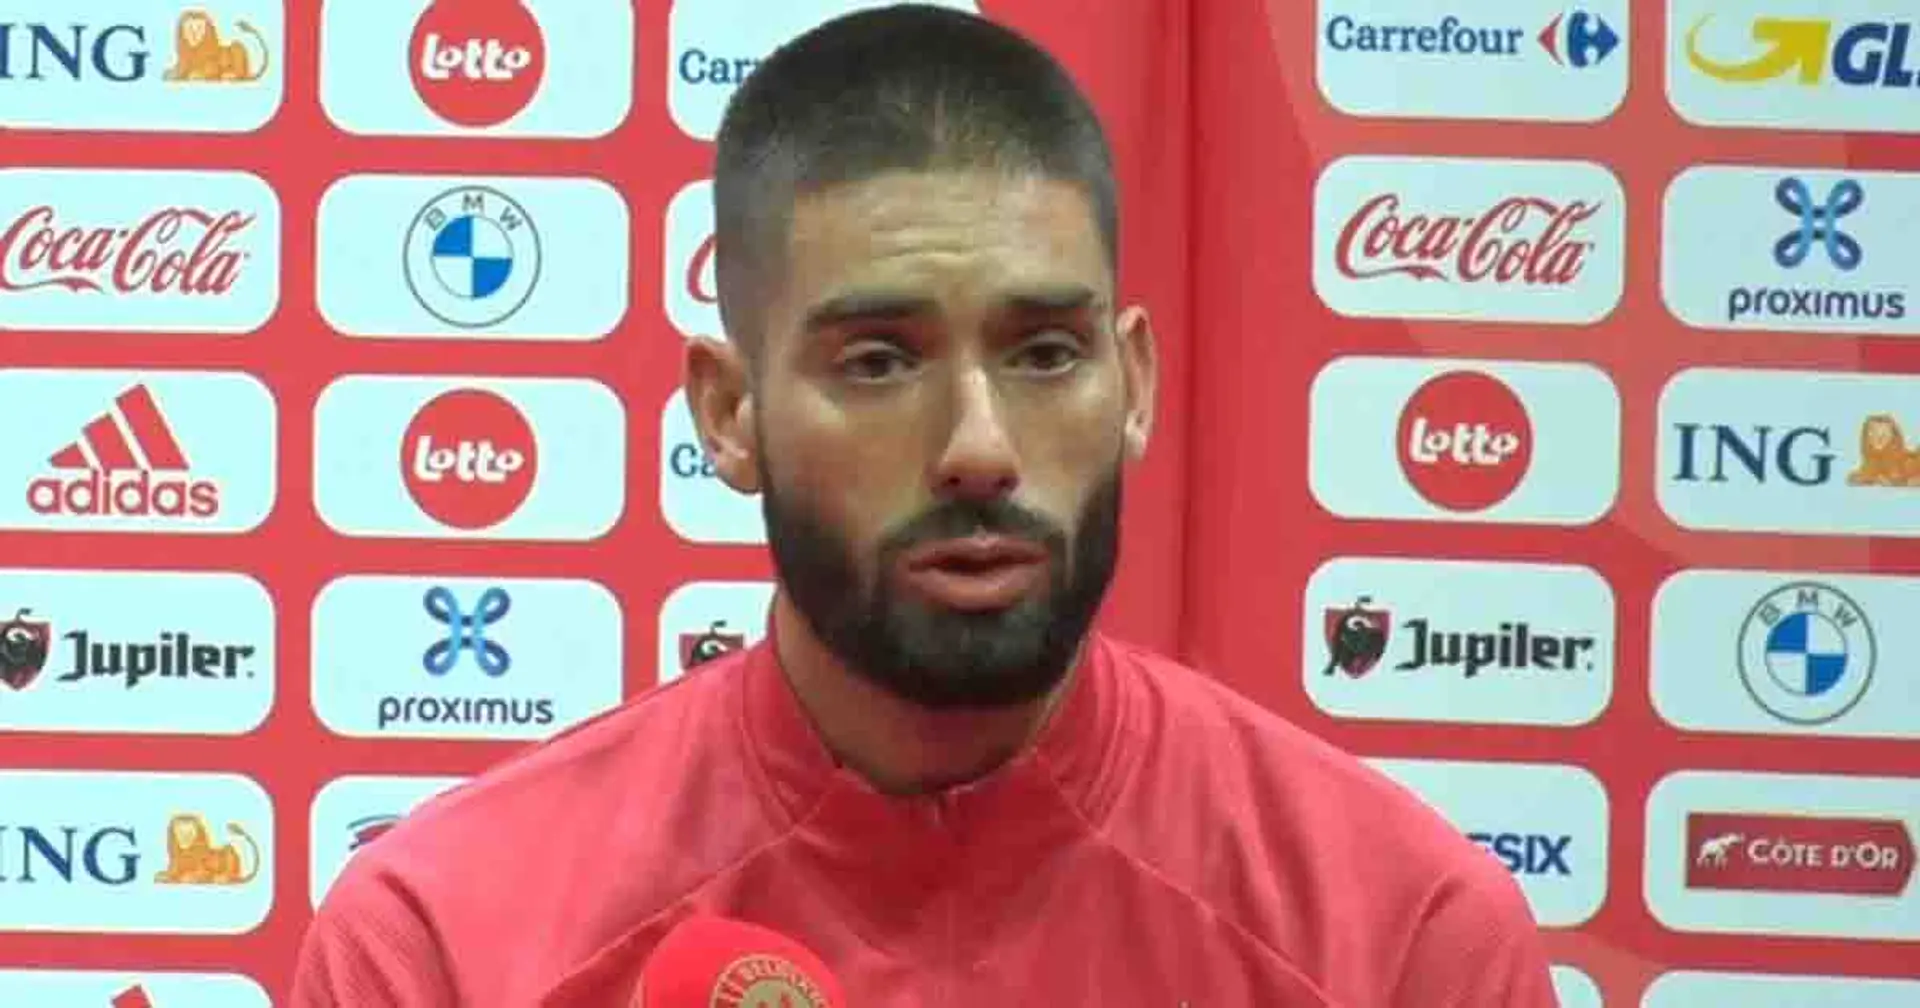 'You never know what can happen': Barca-linked Carrasco breaks silence on his future